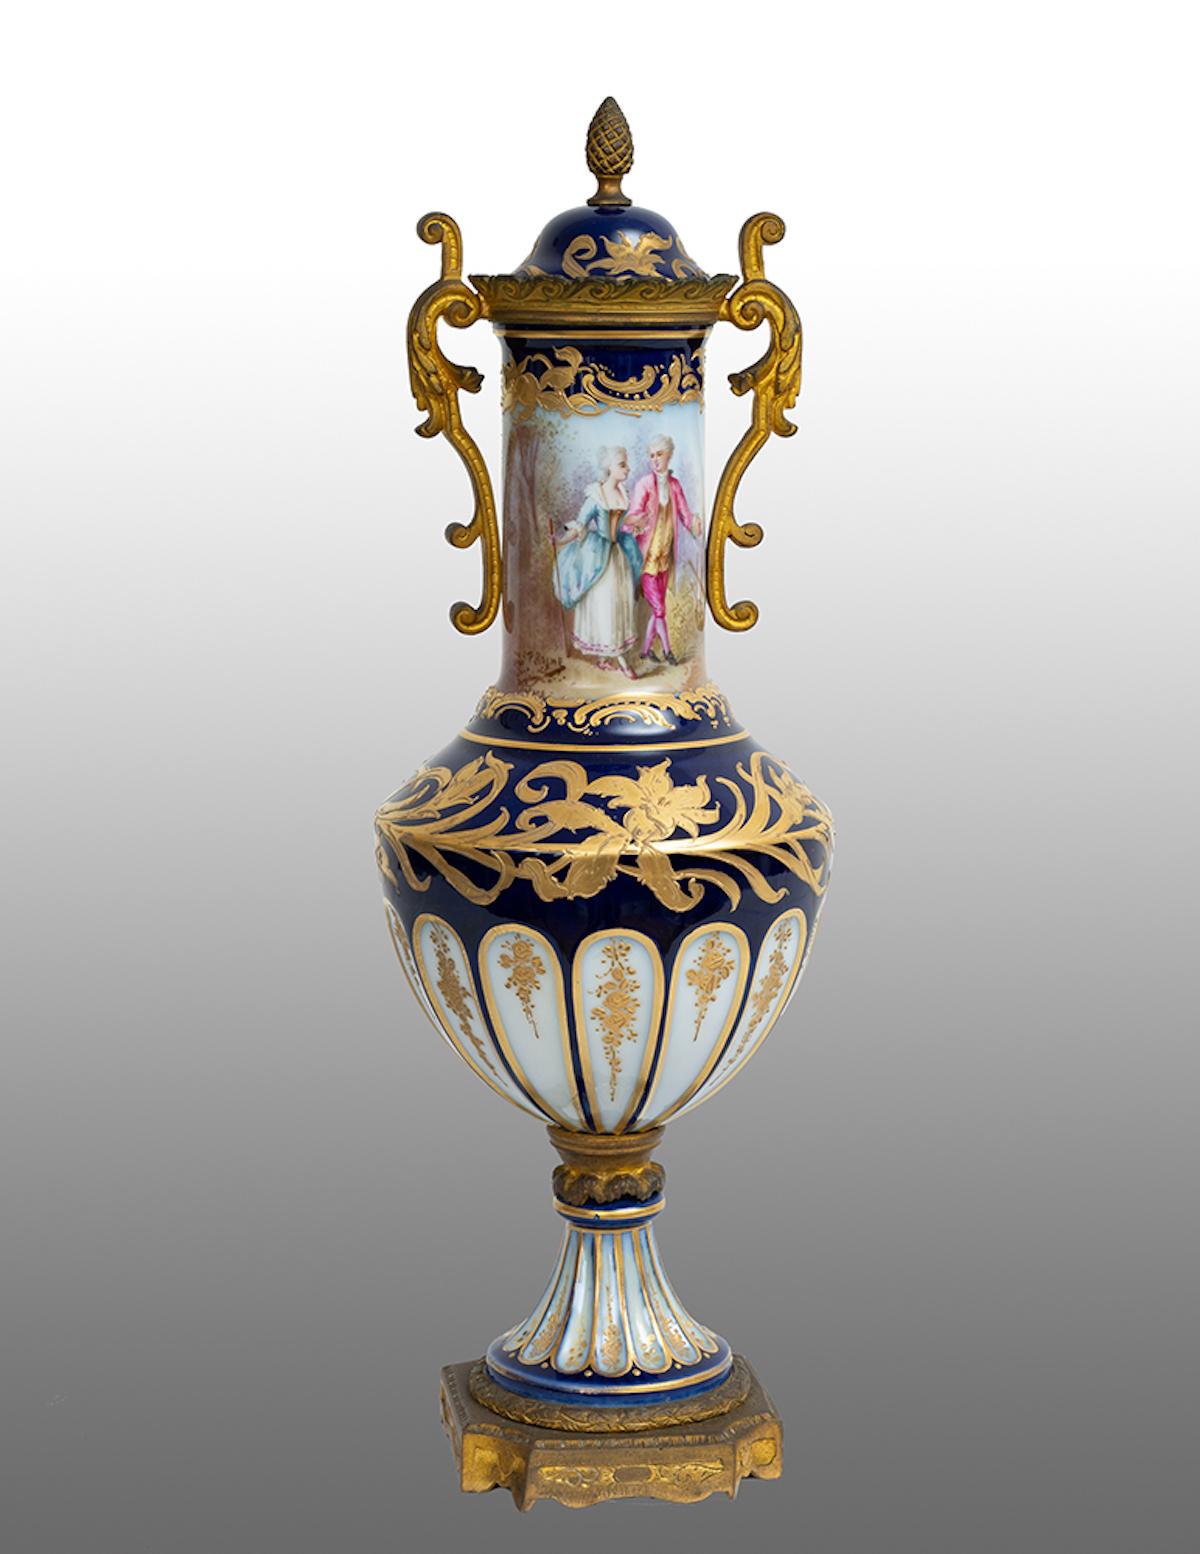 Antique French Napoleon III porcelain vase from Sevres 19th century